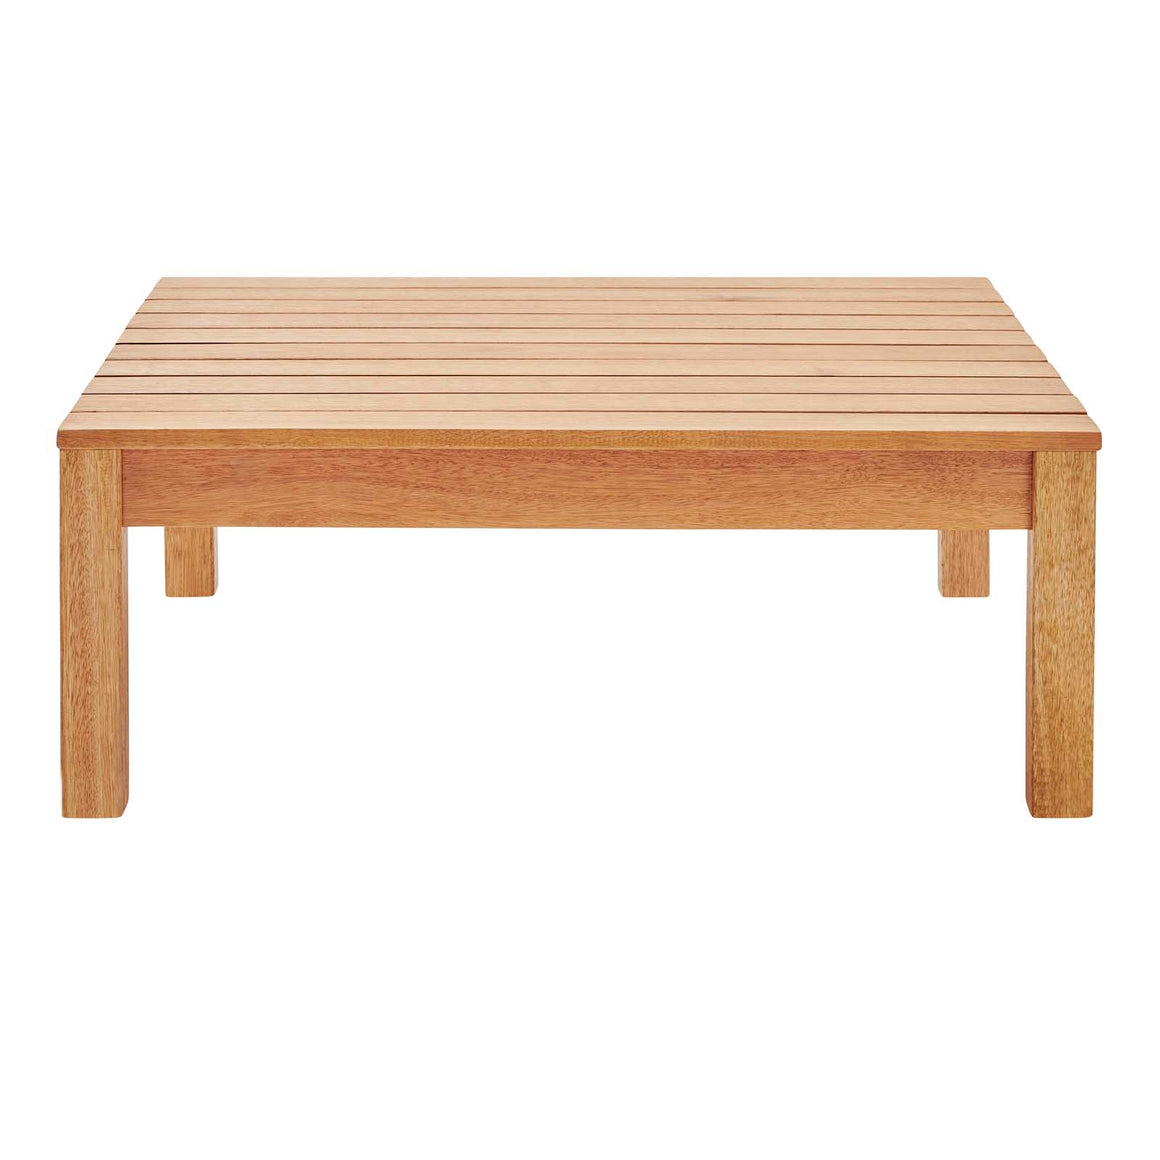 Freeport Outdoor Patio Patio Coffee Table Natural